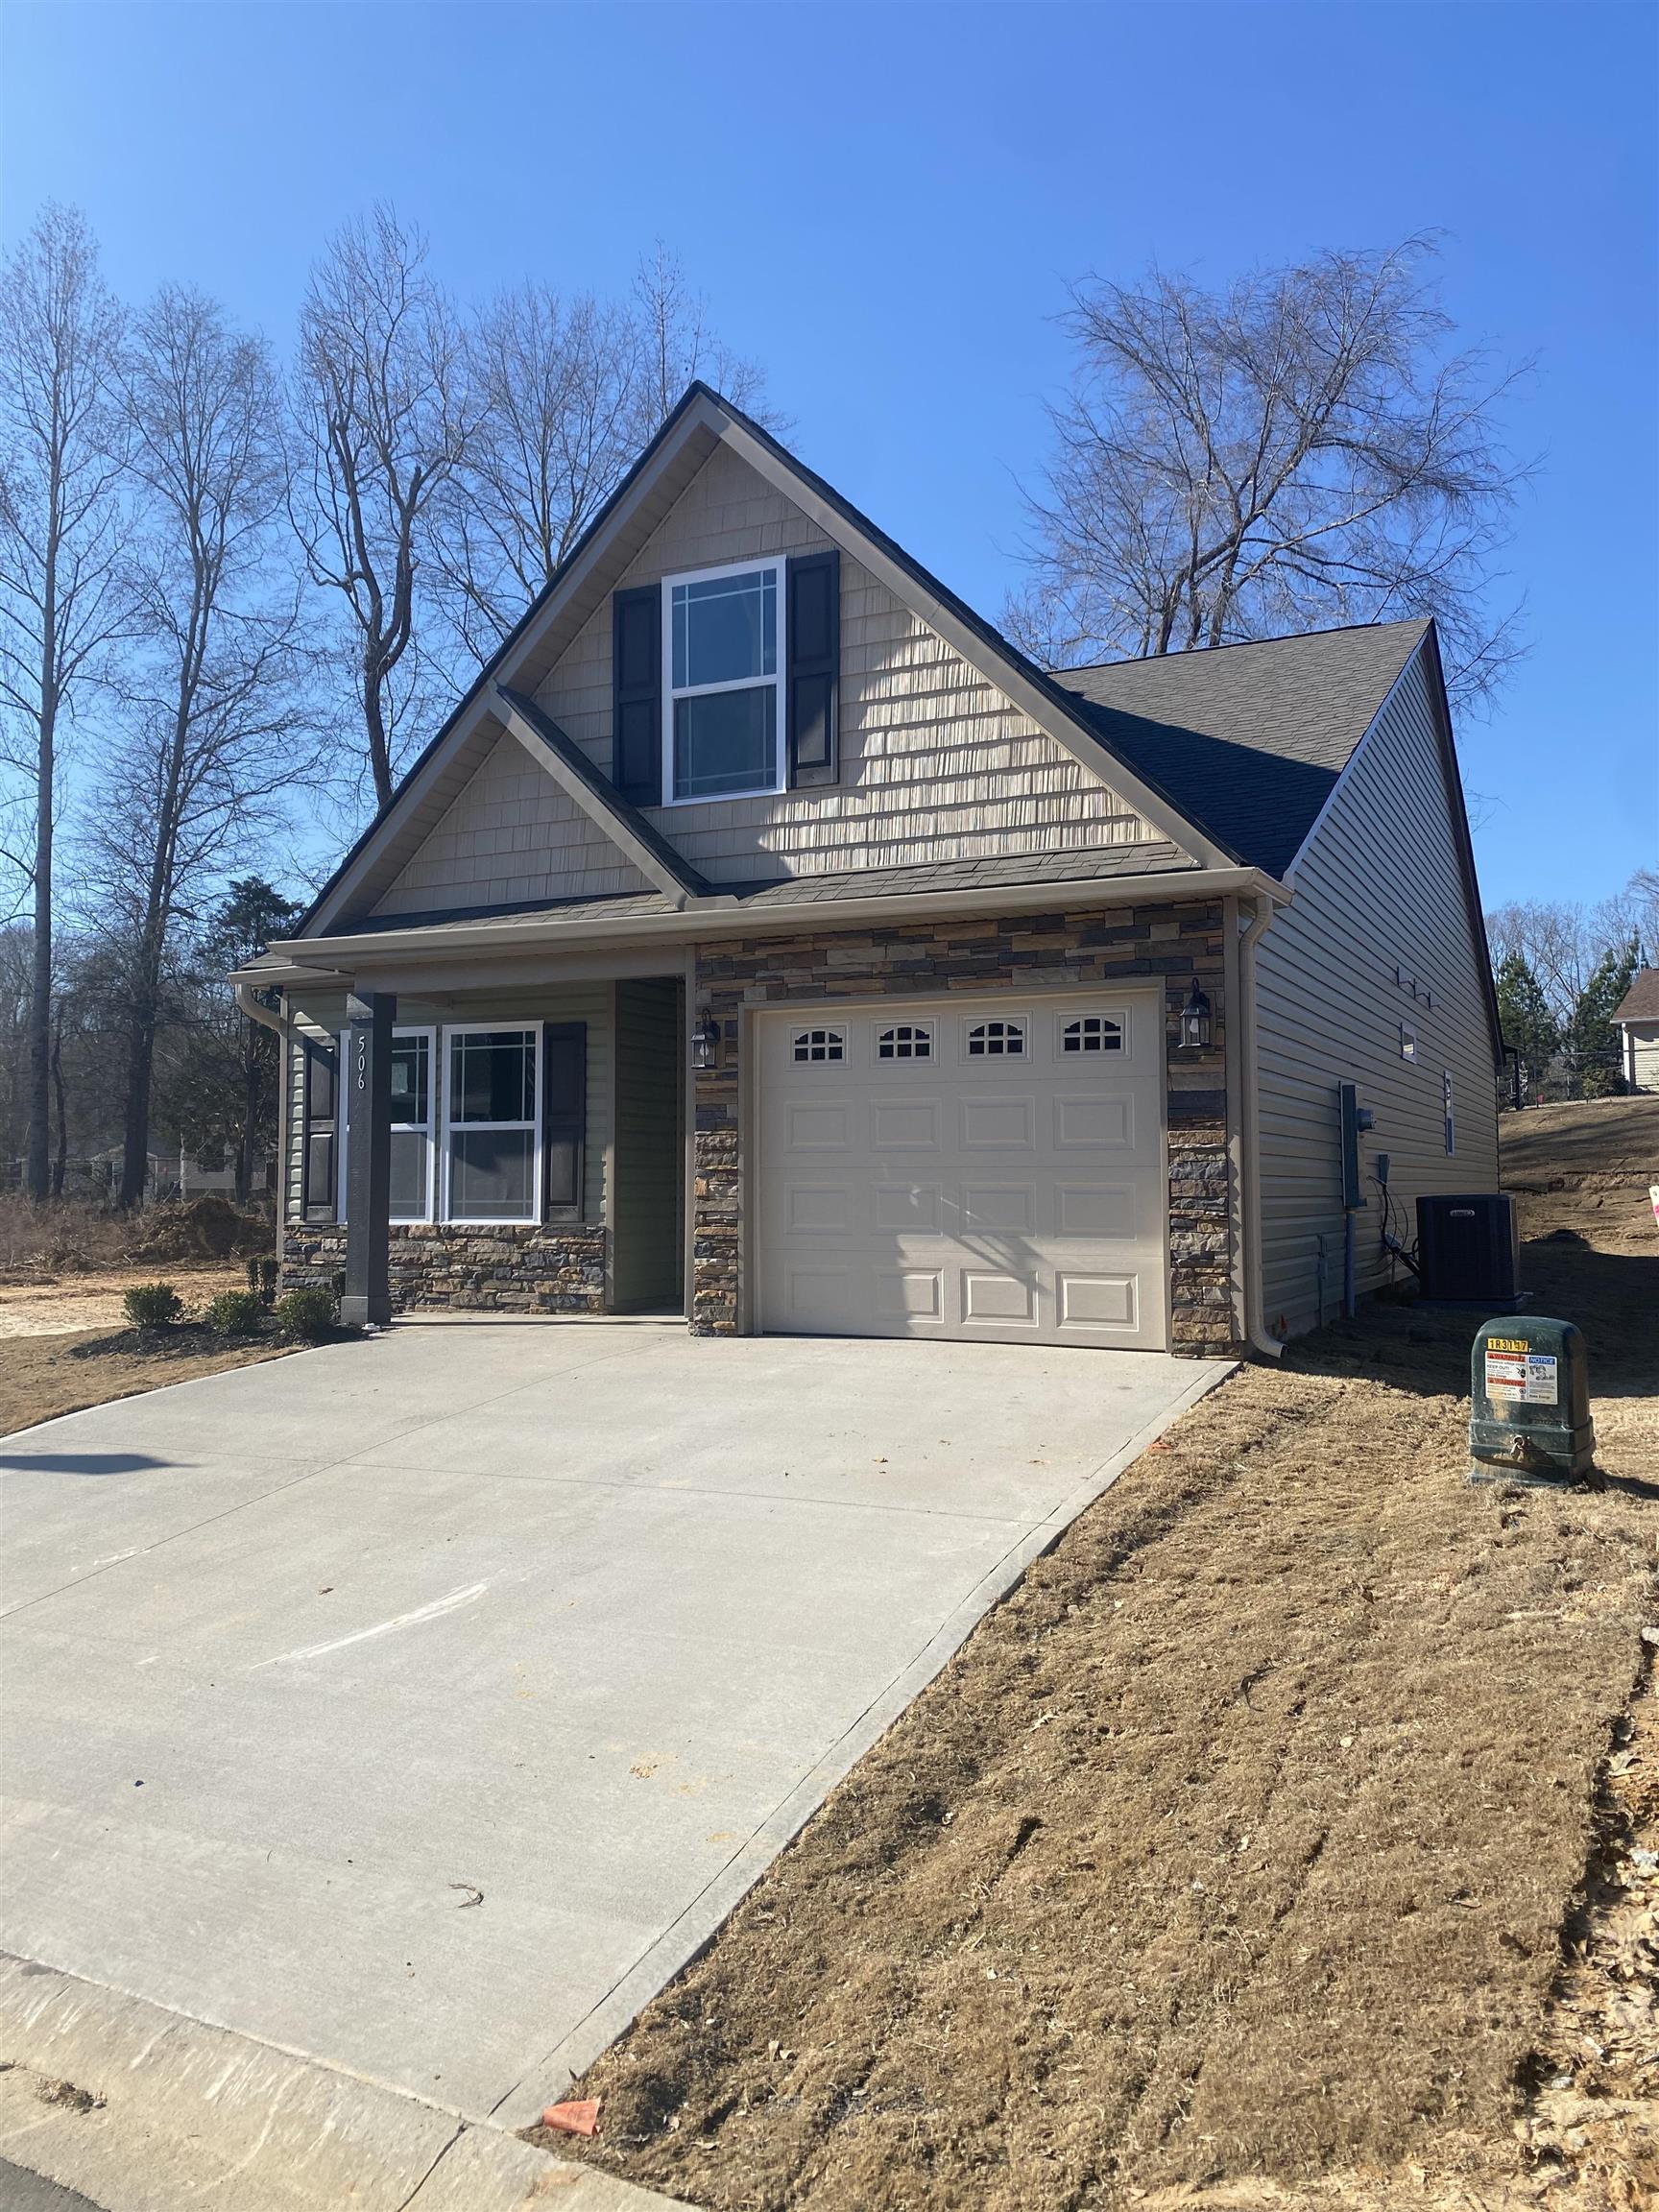 One level - Inman plan with added Sunroom. Over 1300 SF home being custom built for customer. 2 BR/ 2BA with granite countertops, marsh cabinetry, corner fireplace with gas logs, 12 x 12 Sunroom and more.